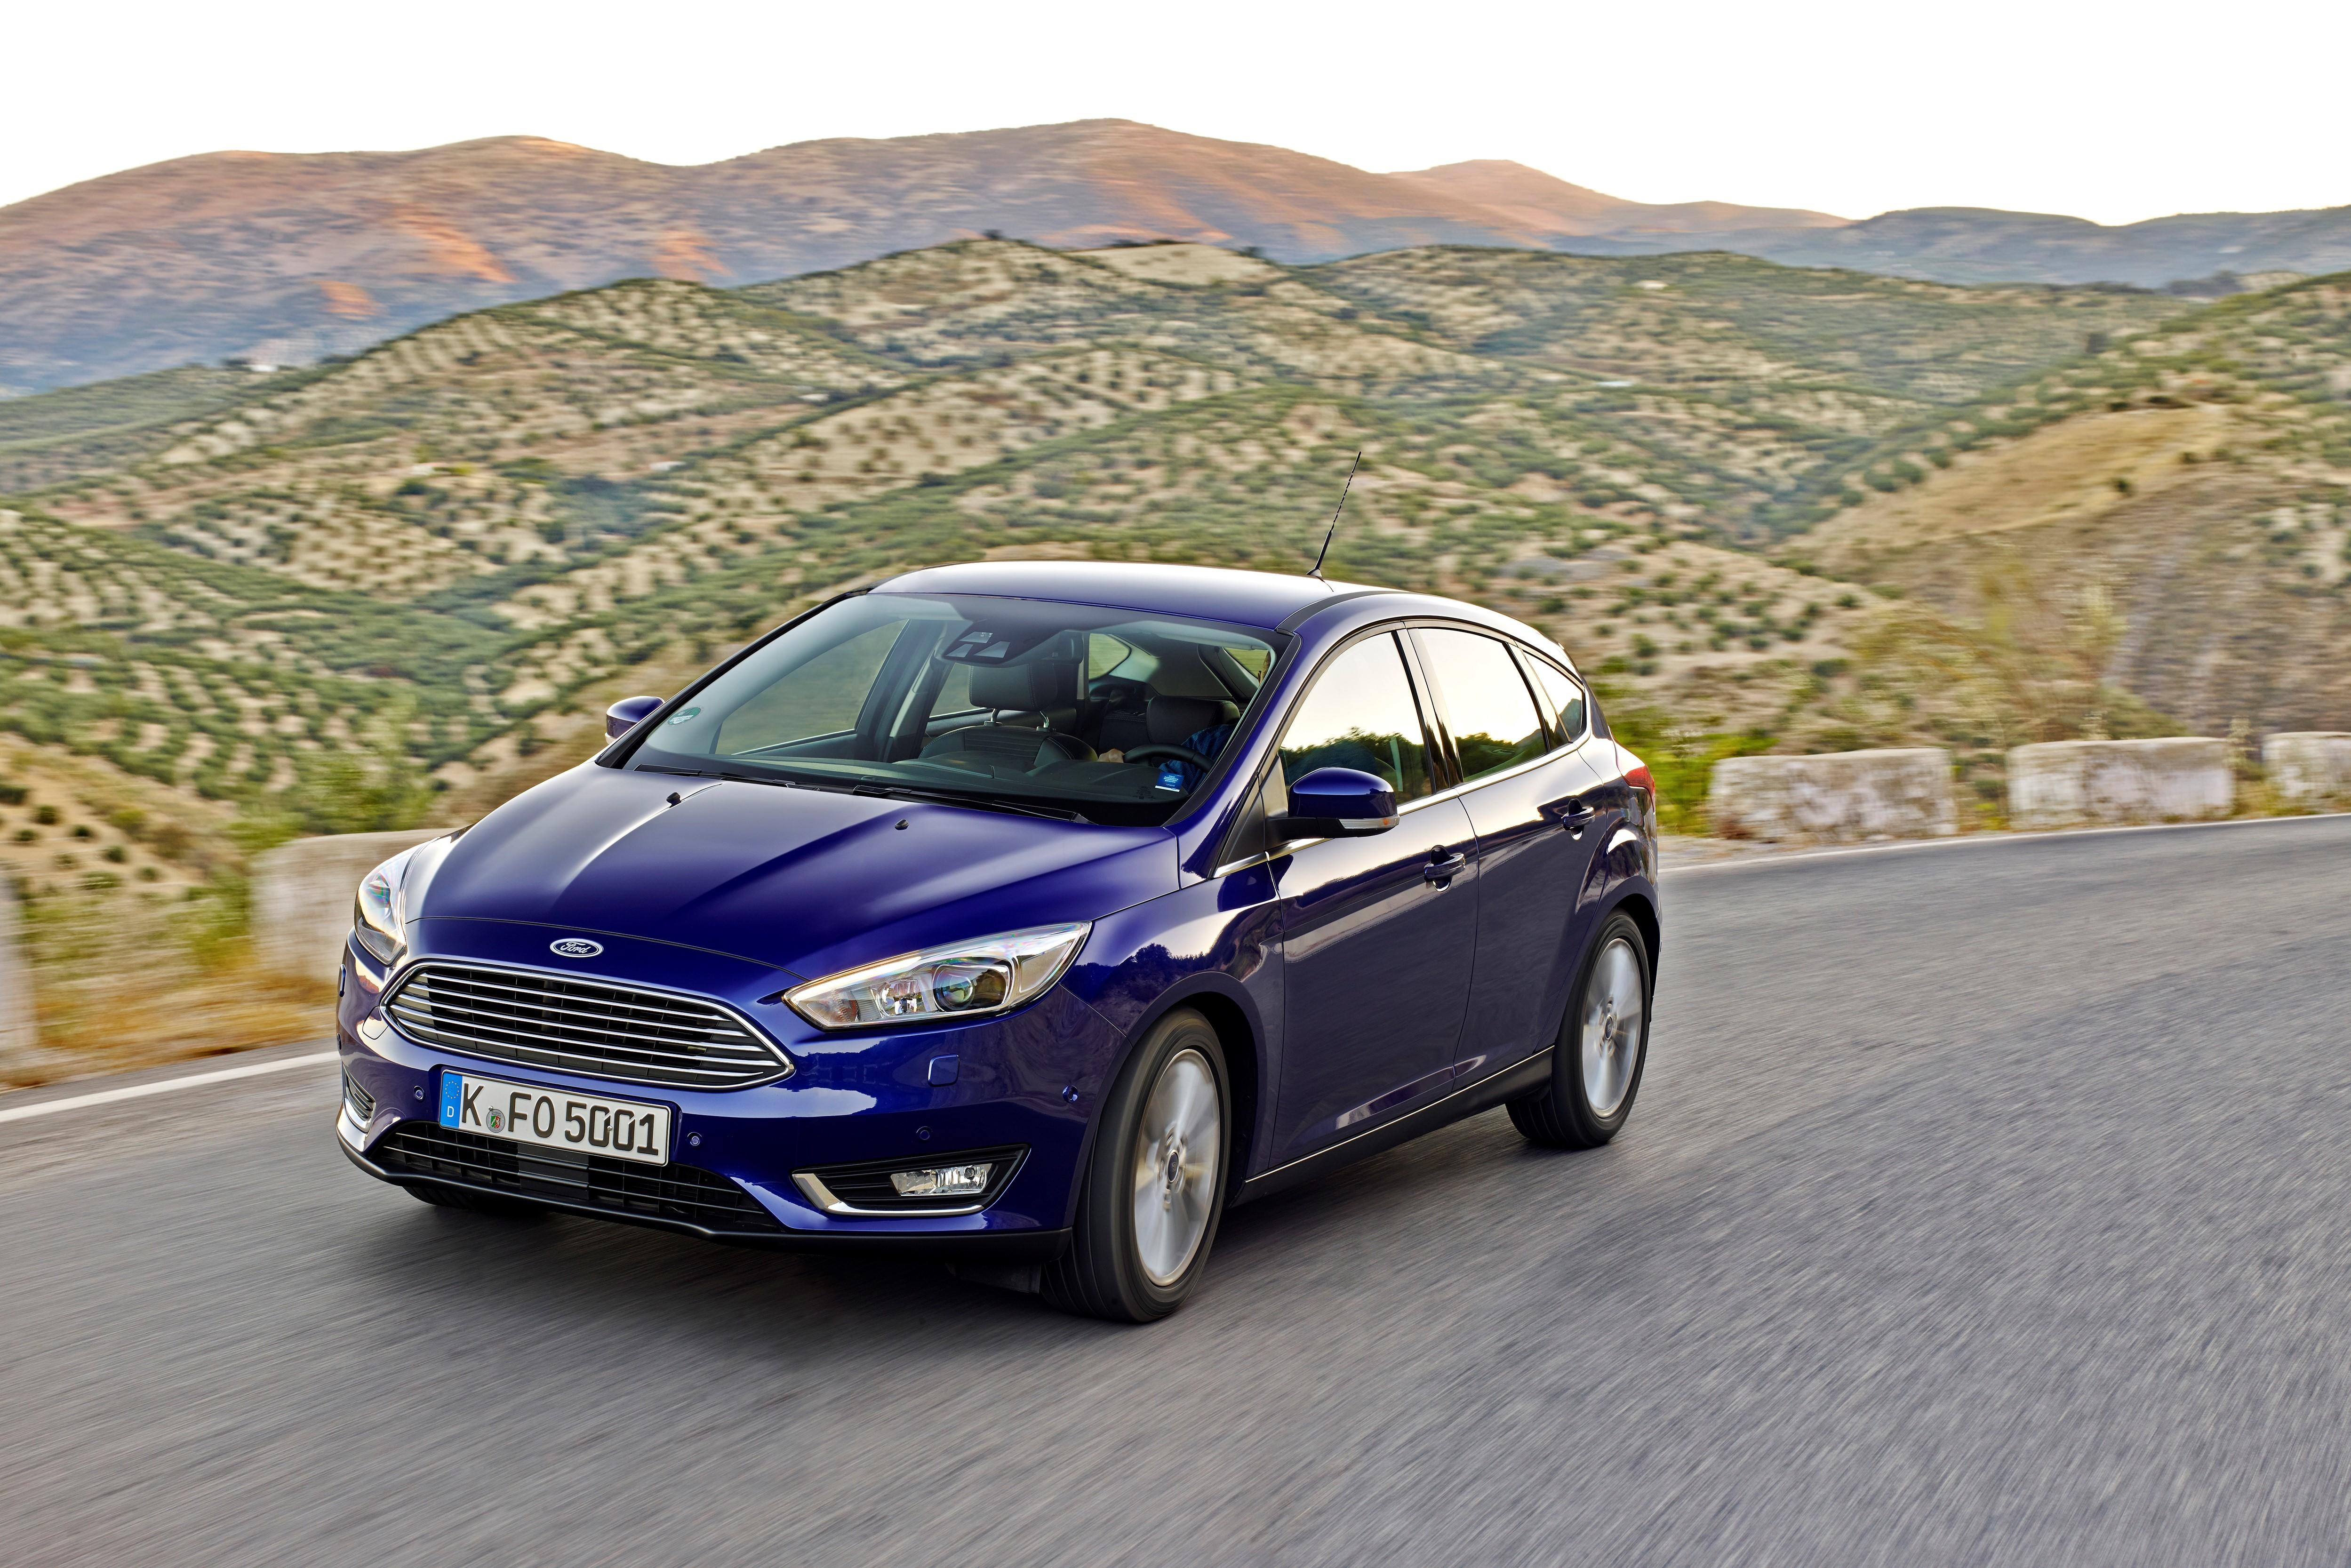 Ford Focus 2015. Форд фокус 3 2015. Форд фокус 3 2014. Форд фокус 4 2014. Машины 2015 года куплю